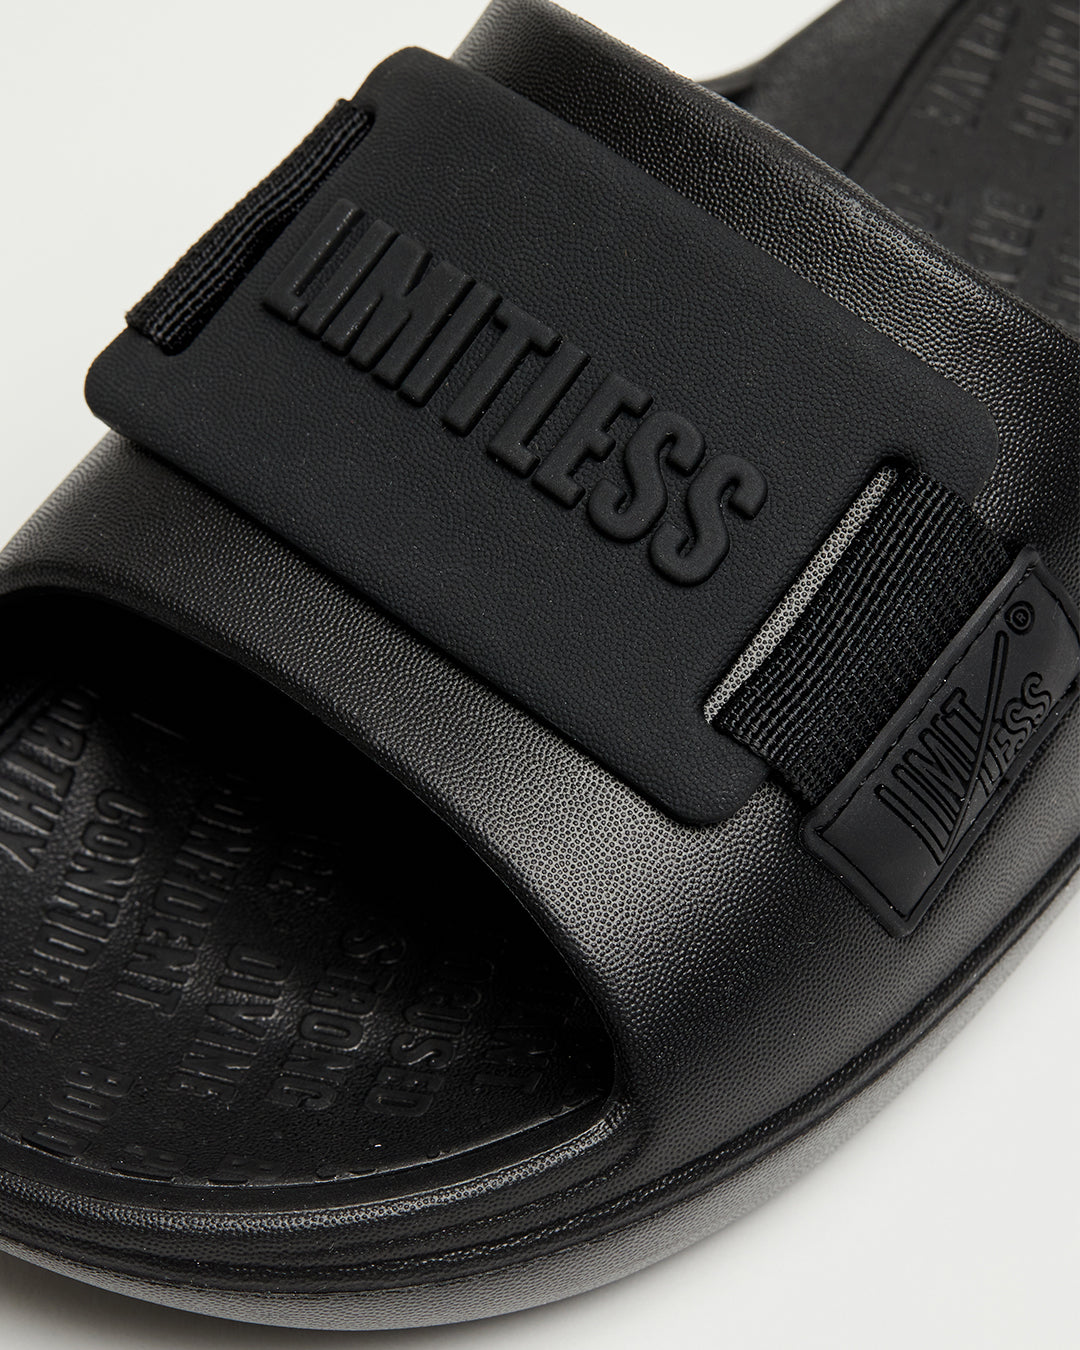 LIMITLESS SLIDES™ WITH ESSENTIAL TIBAH™ QUAD - NEVILLE HIGH SCHOOL EDITION